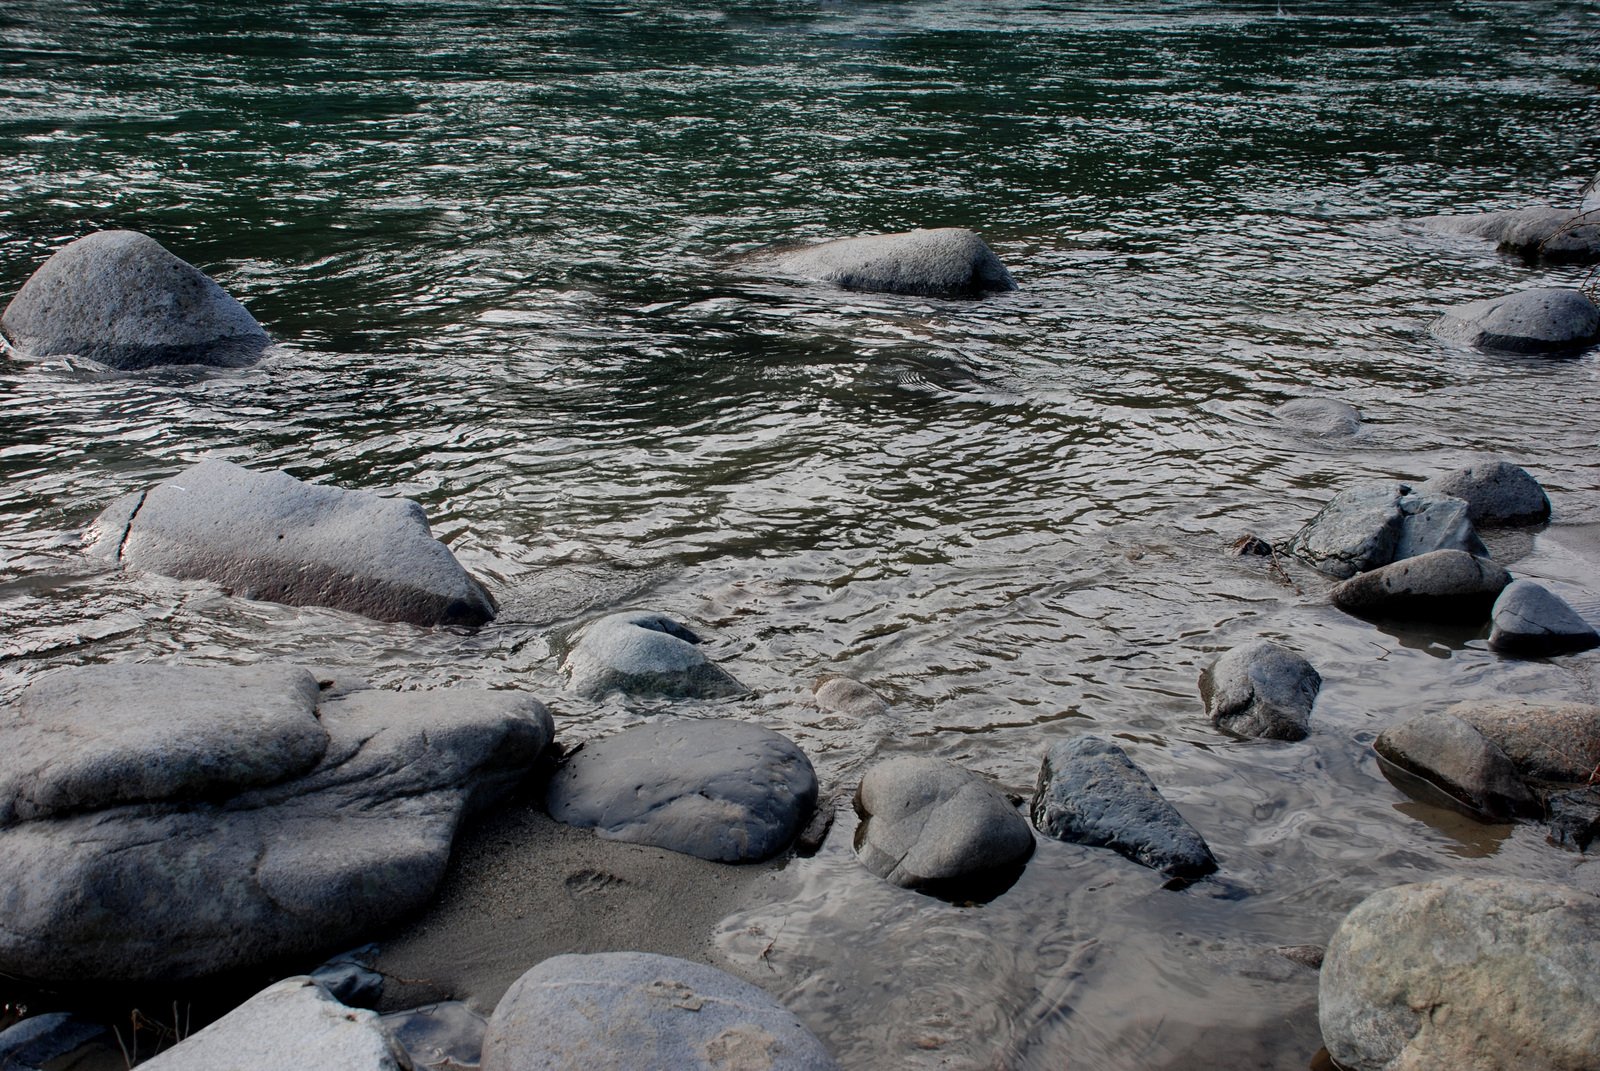 rocks in the water with a large body of water